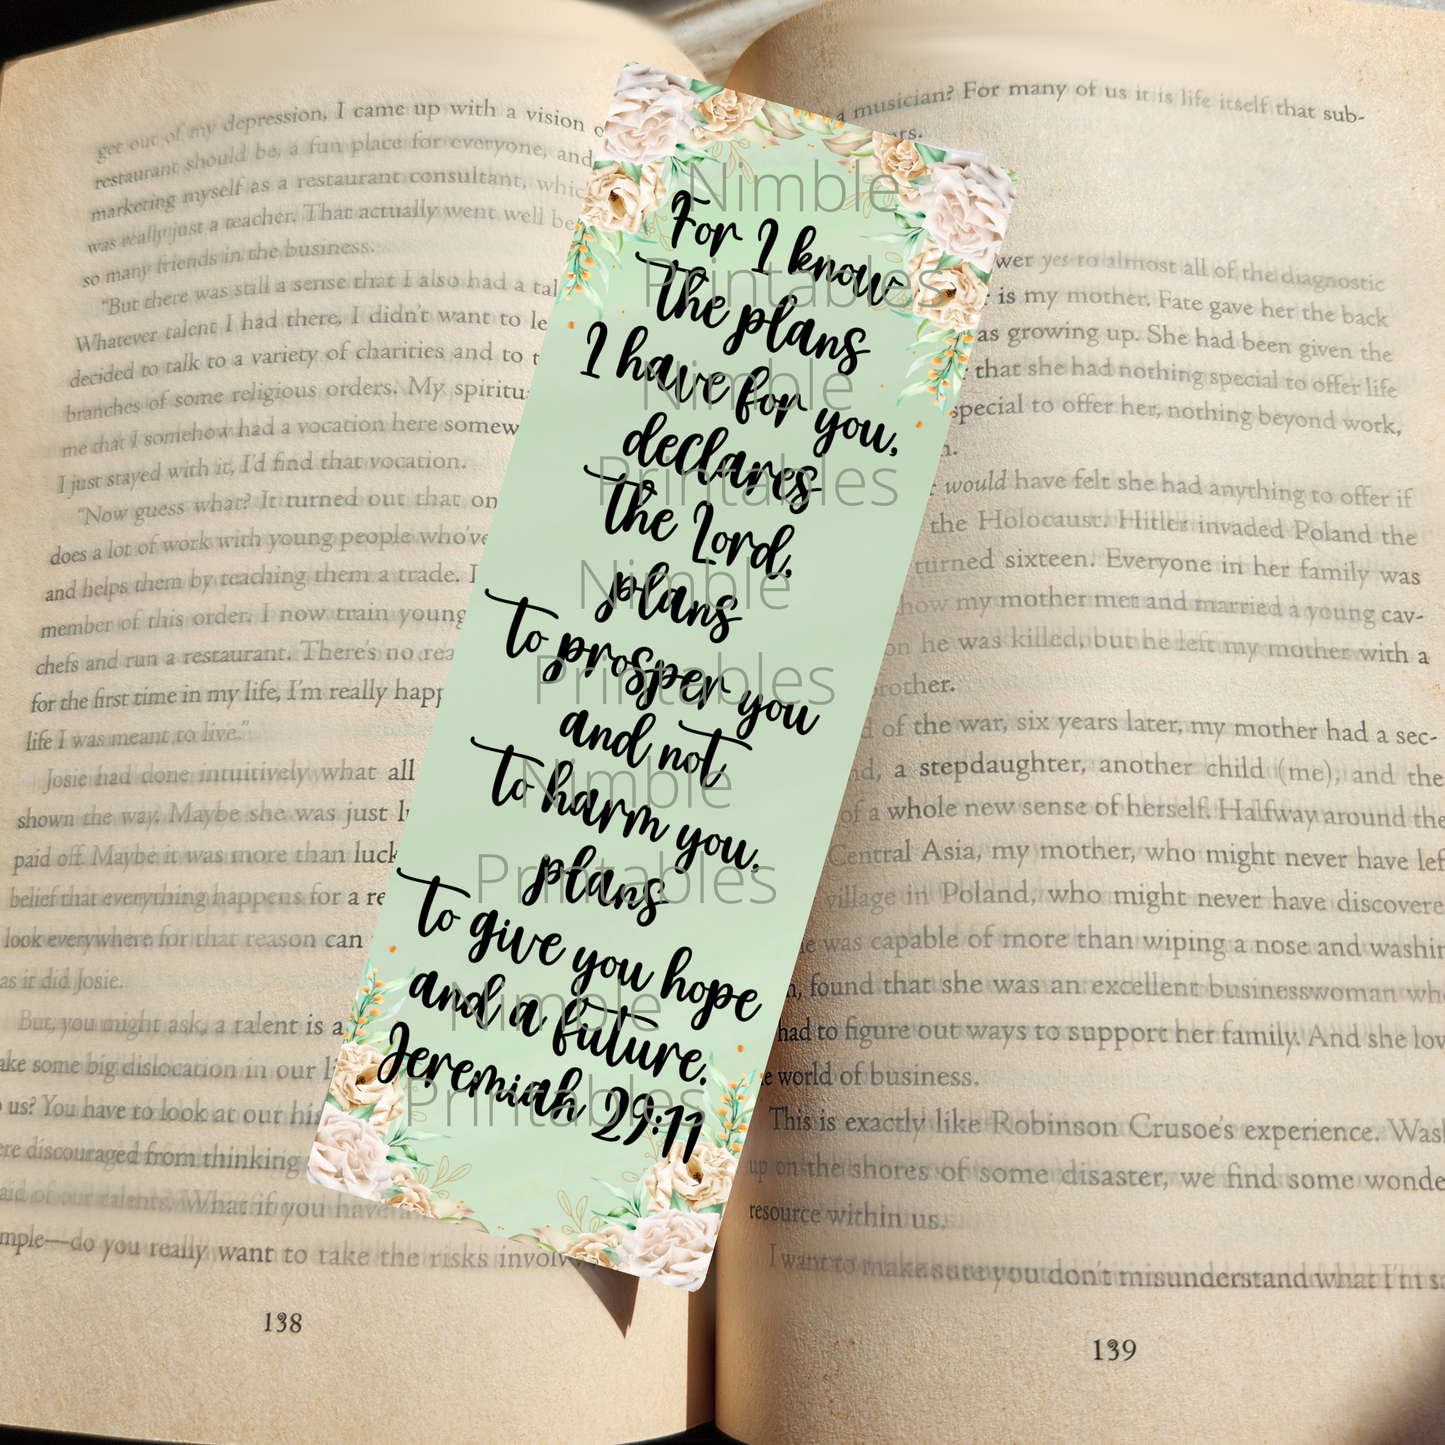 Printable Bookmarks Bible Verses Bundle, Digital Downloads, Watercolor Bookmark, 10 PNG and 10 JPG Bookmark Sublimation Inspirational Quotes